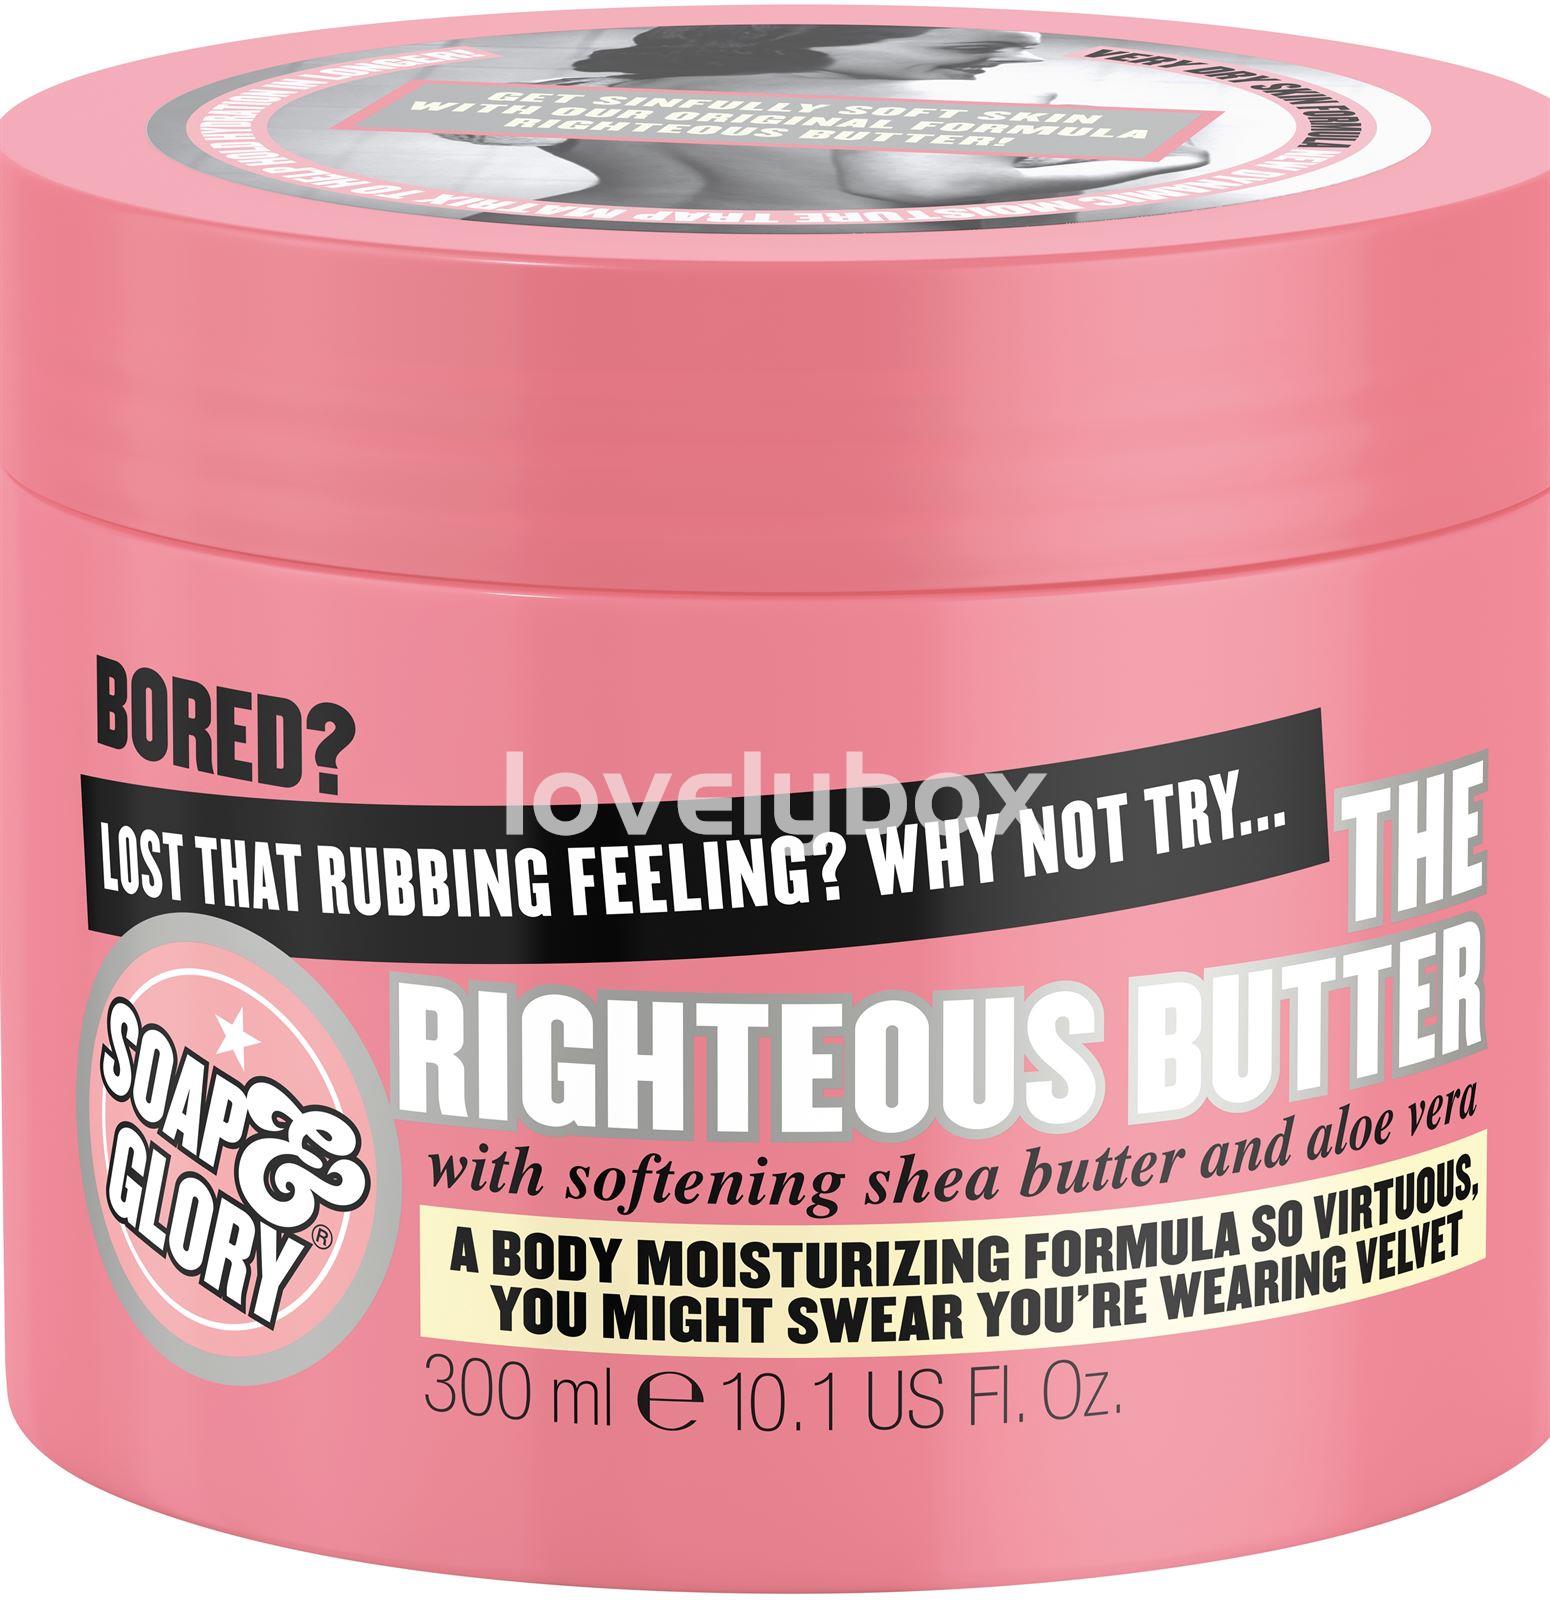 Manteca corporal THE RIGHTEOUS soap&glory - Imagen 2